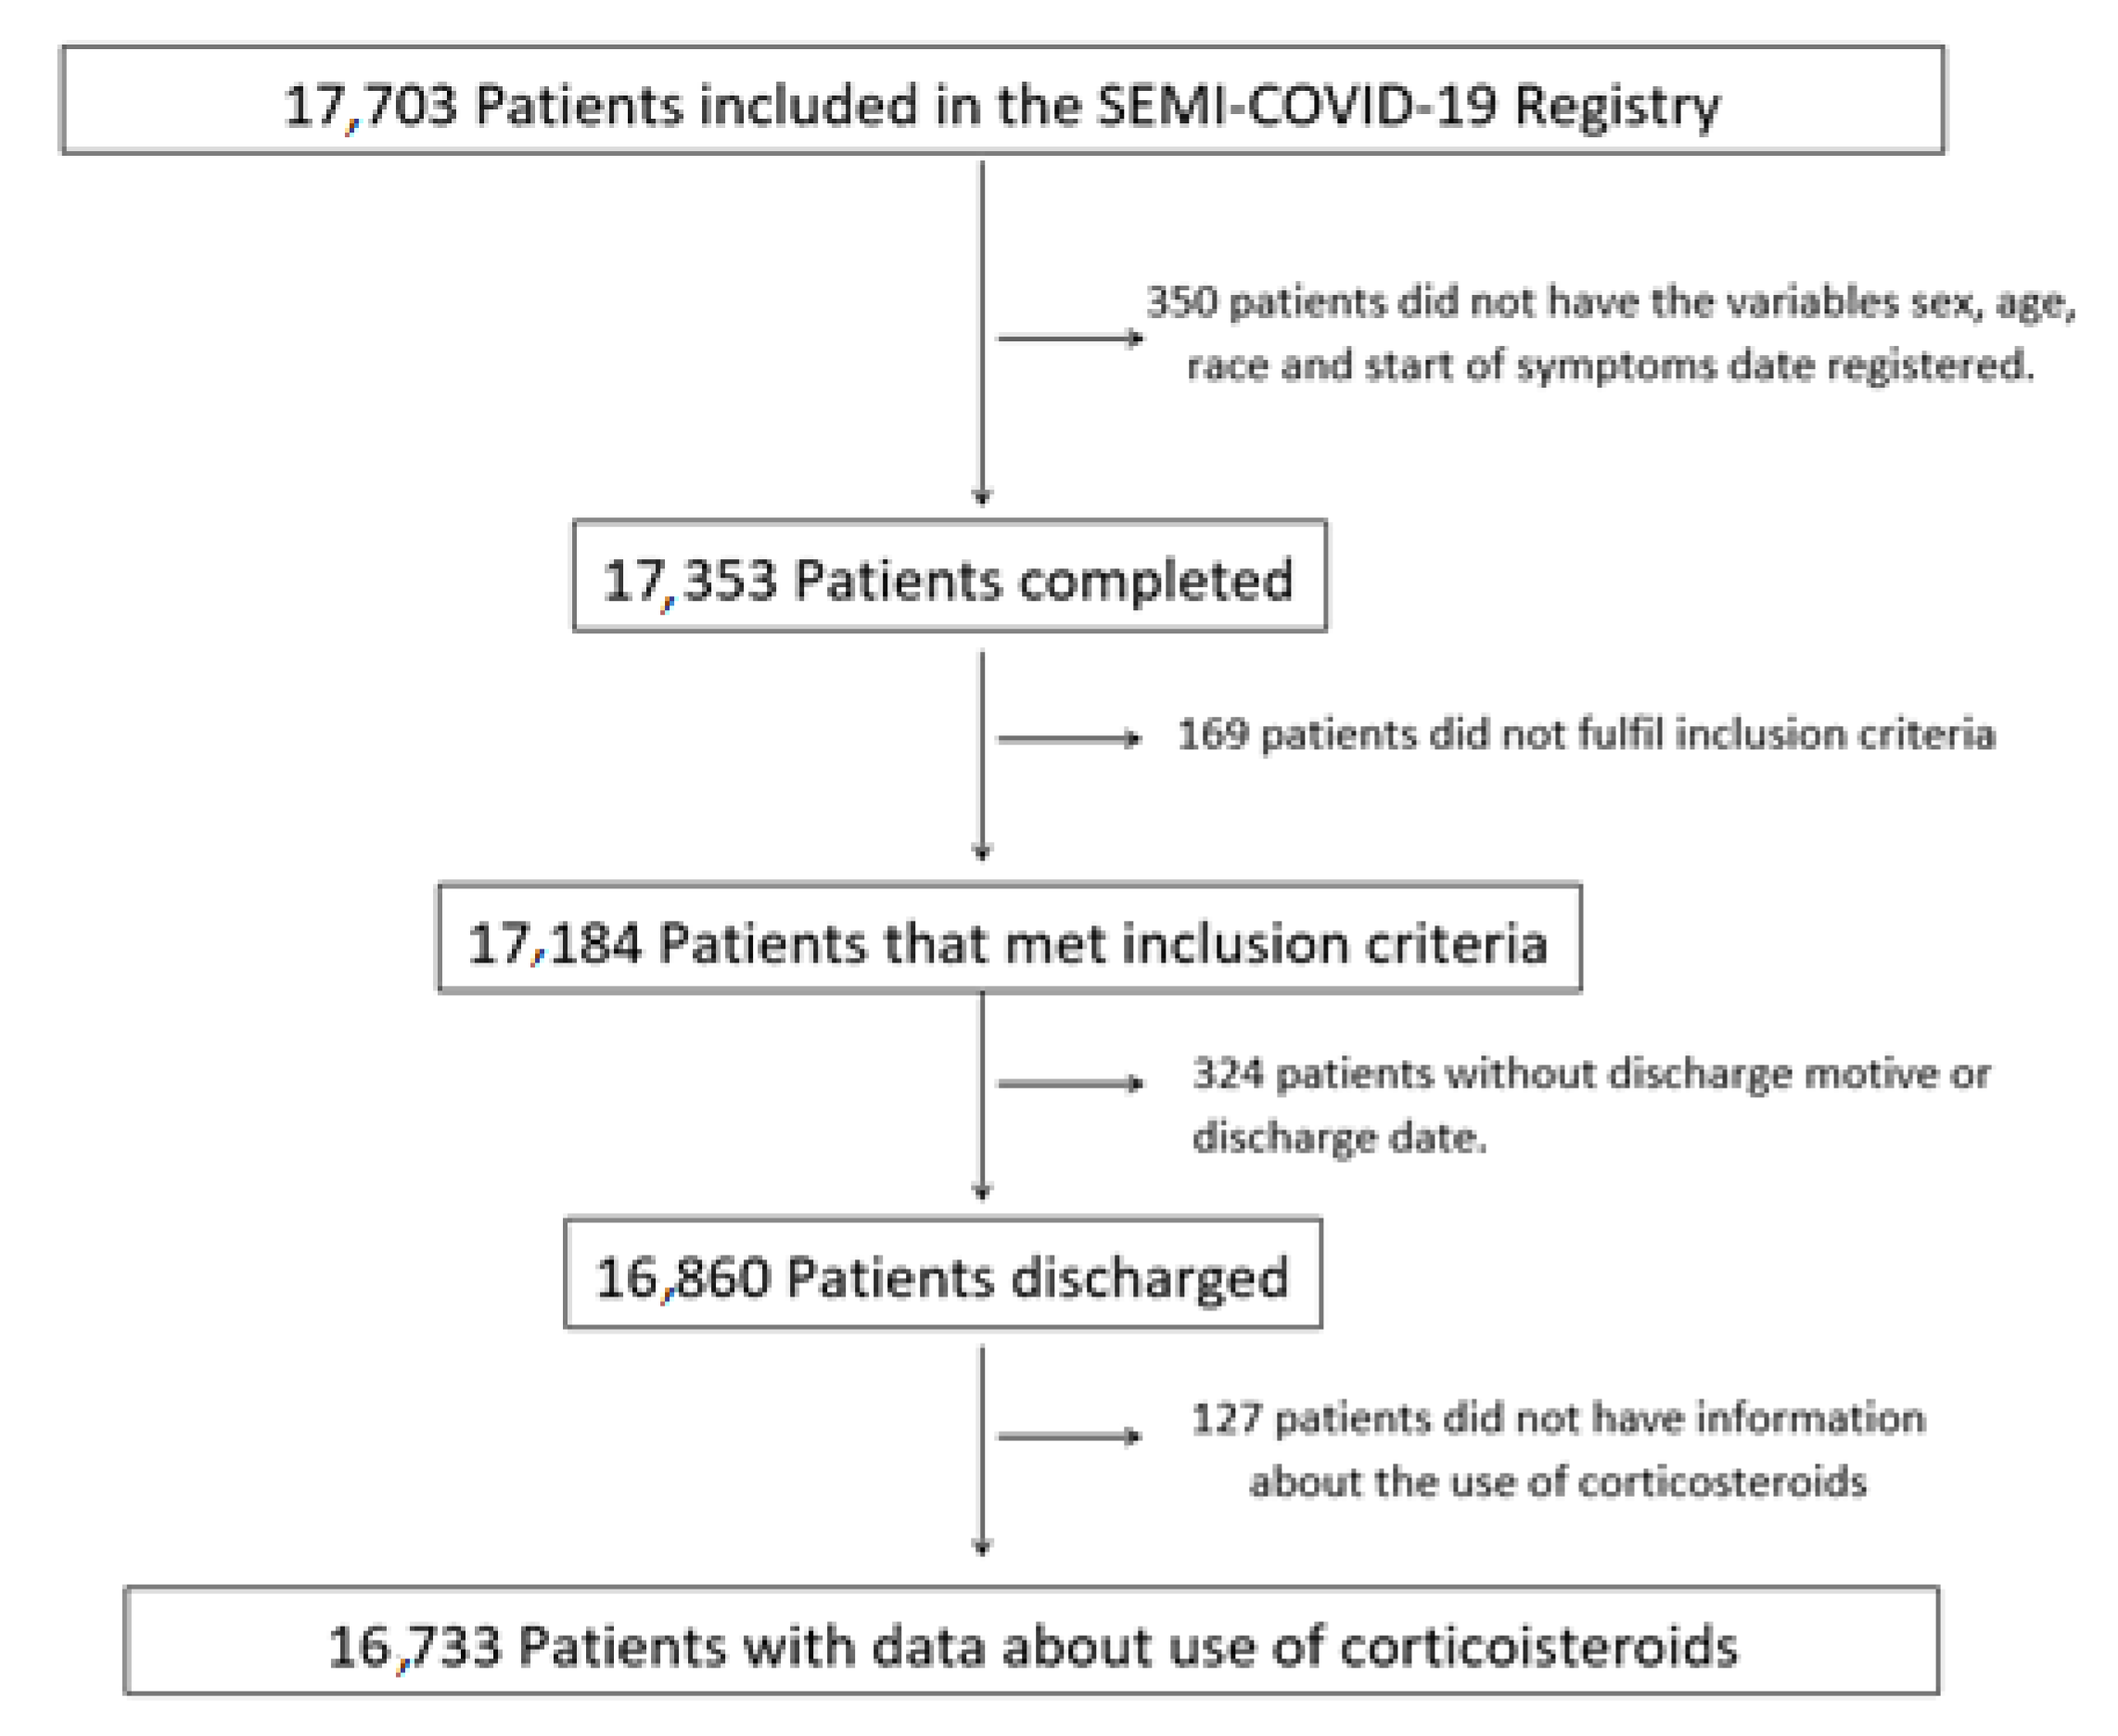 JCM | Free Full-Text | Evolution of the Use of Corticosteroids for the  Treatment of Hospitalised COVID-19 Patients in Spain between March and  November 2020: SEMI-COVID National Registry